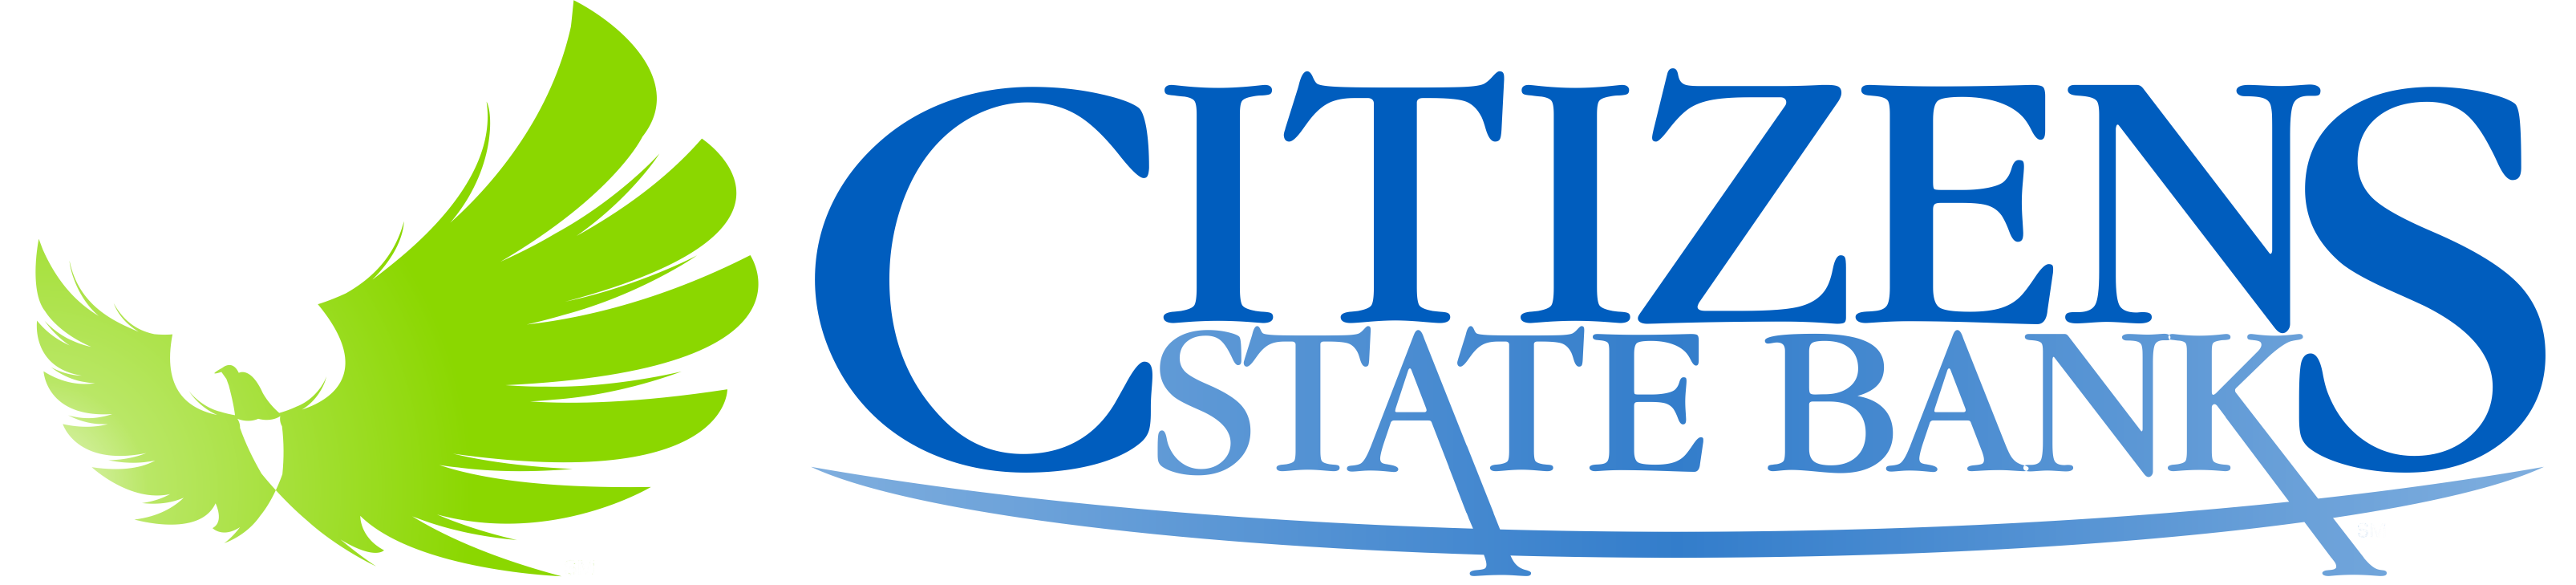 Citizens State Bank (Indiana)